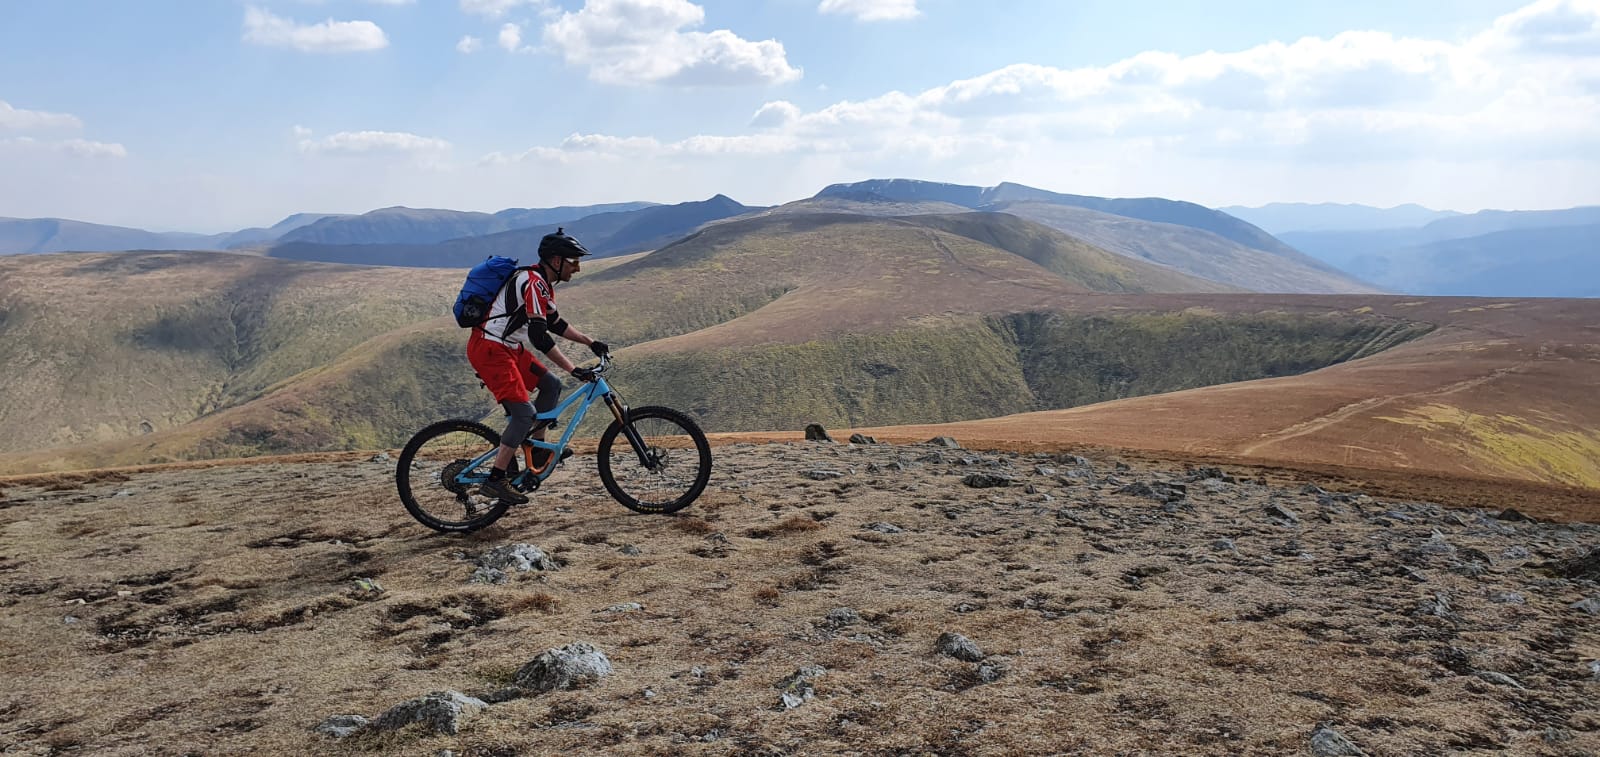 Easy riding along the spine of the Helvellyn massif